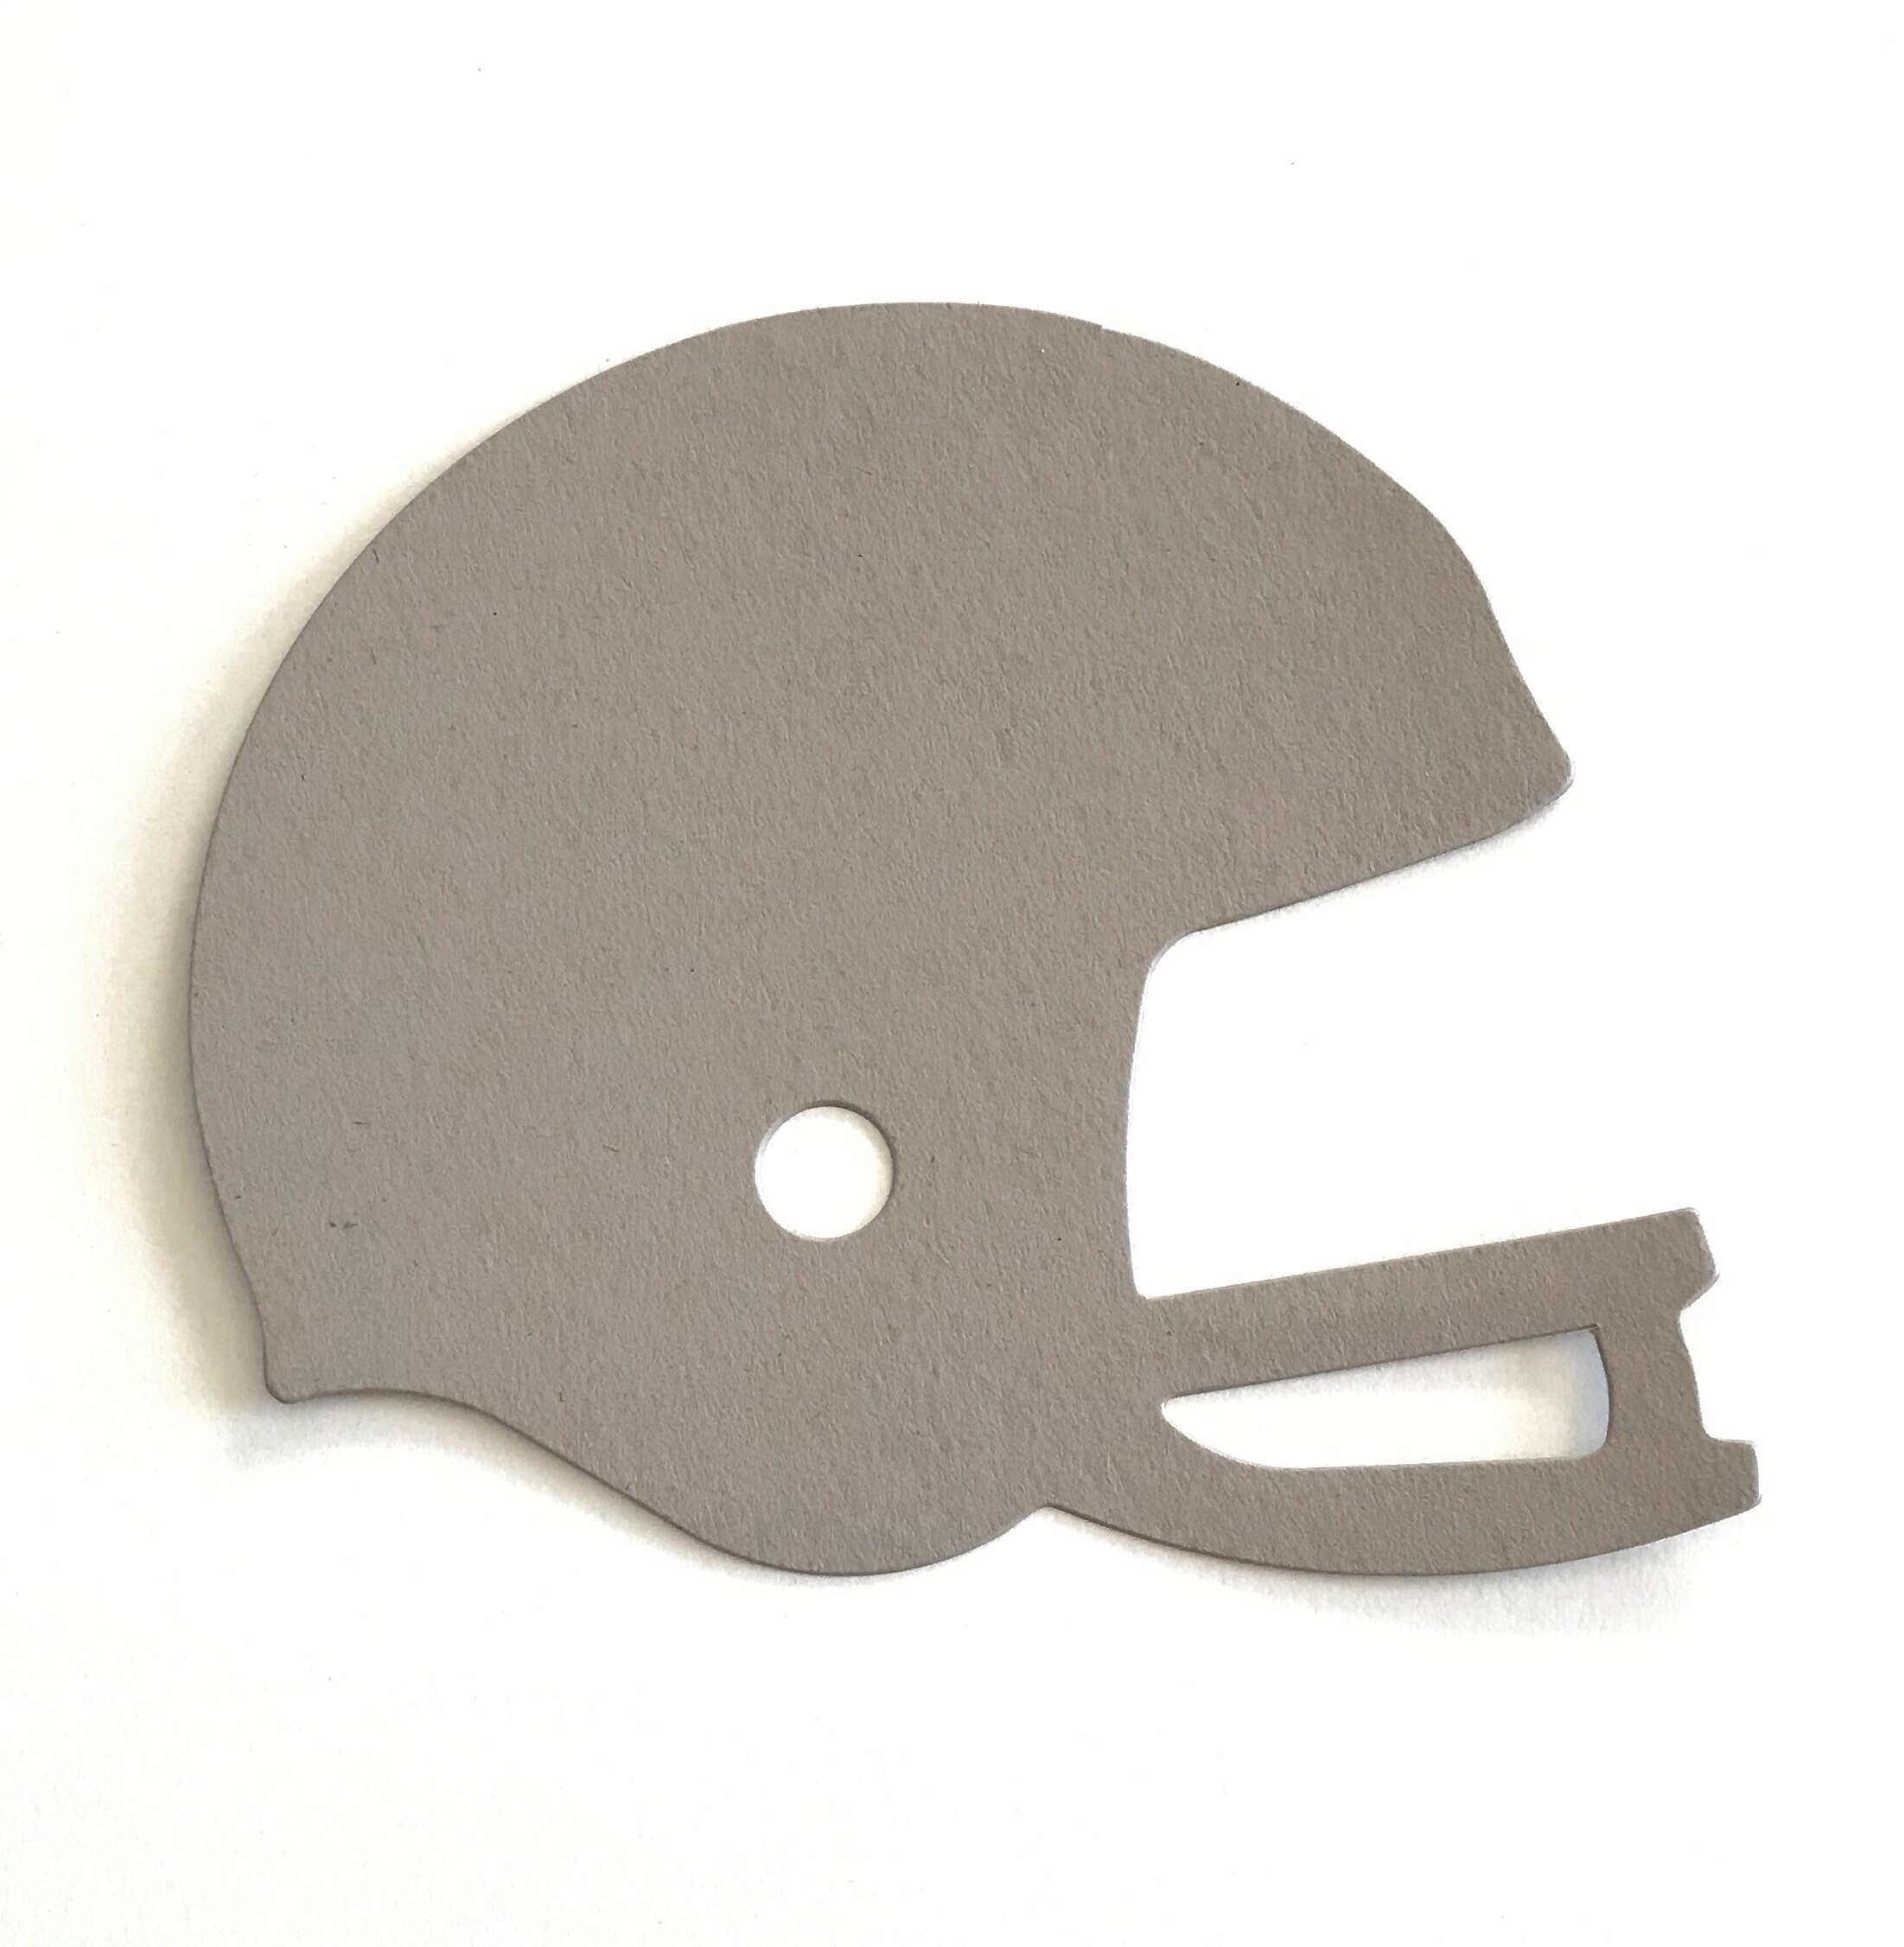 Red Card Stock Football Helmets 4 Die Cut Shapes Table Scatters Sports  Banquets, Mum Supplies Sports Goody Bags Shadow Box 